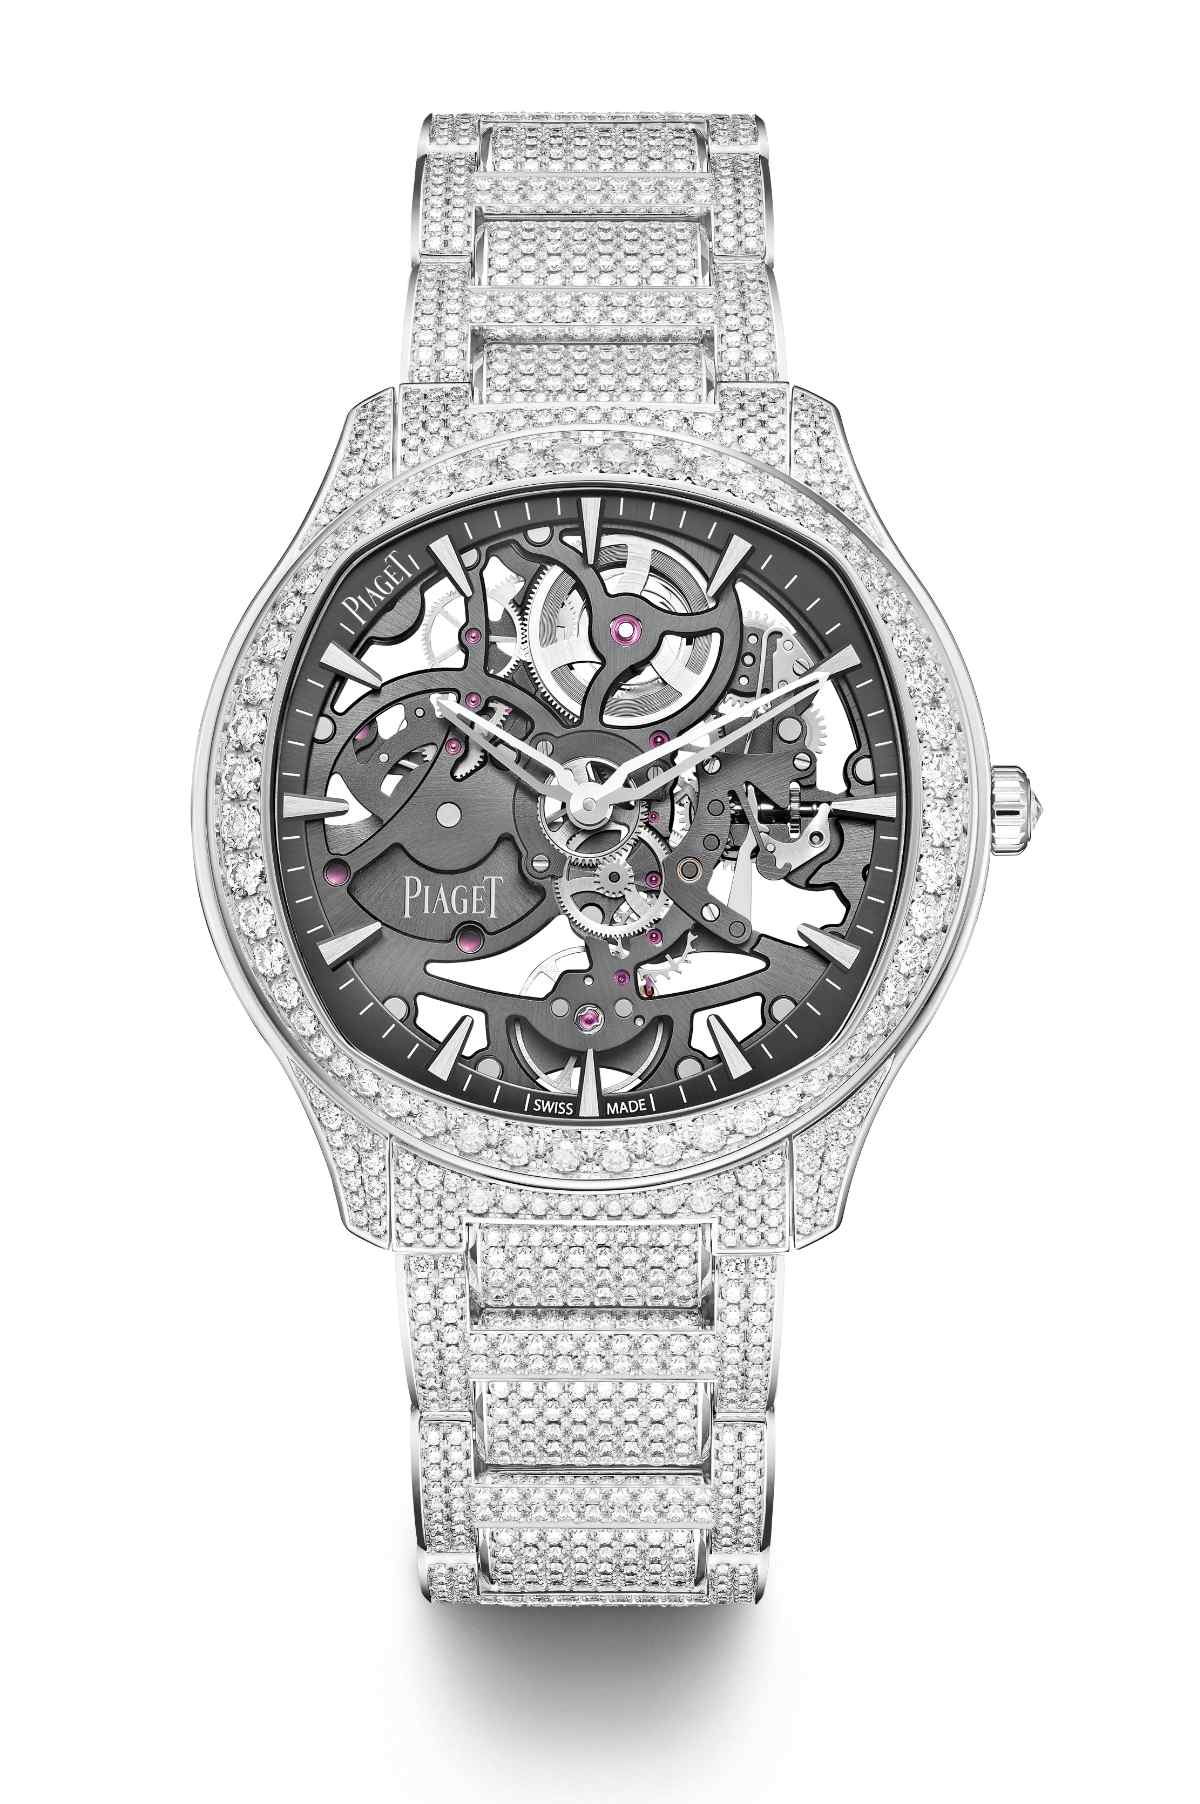 New Piaget Polo Skeleton: When Master Watchmakers Work With Master Jewellers